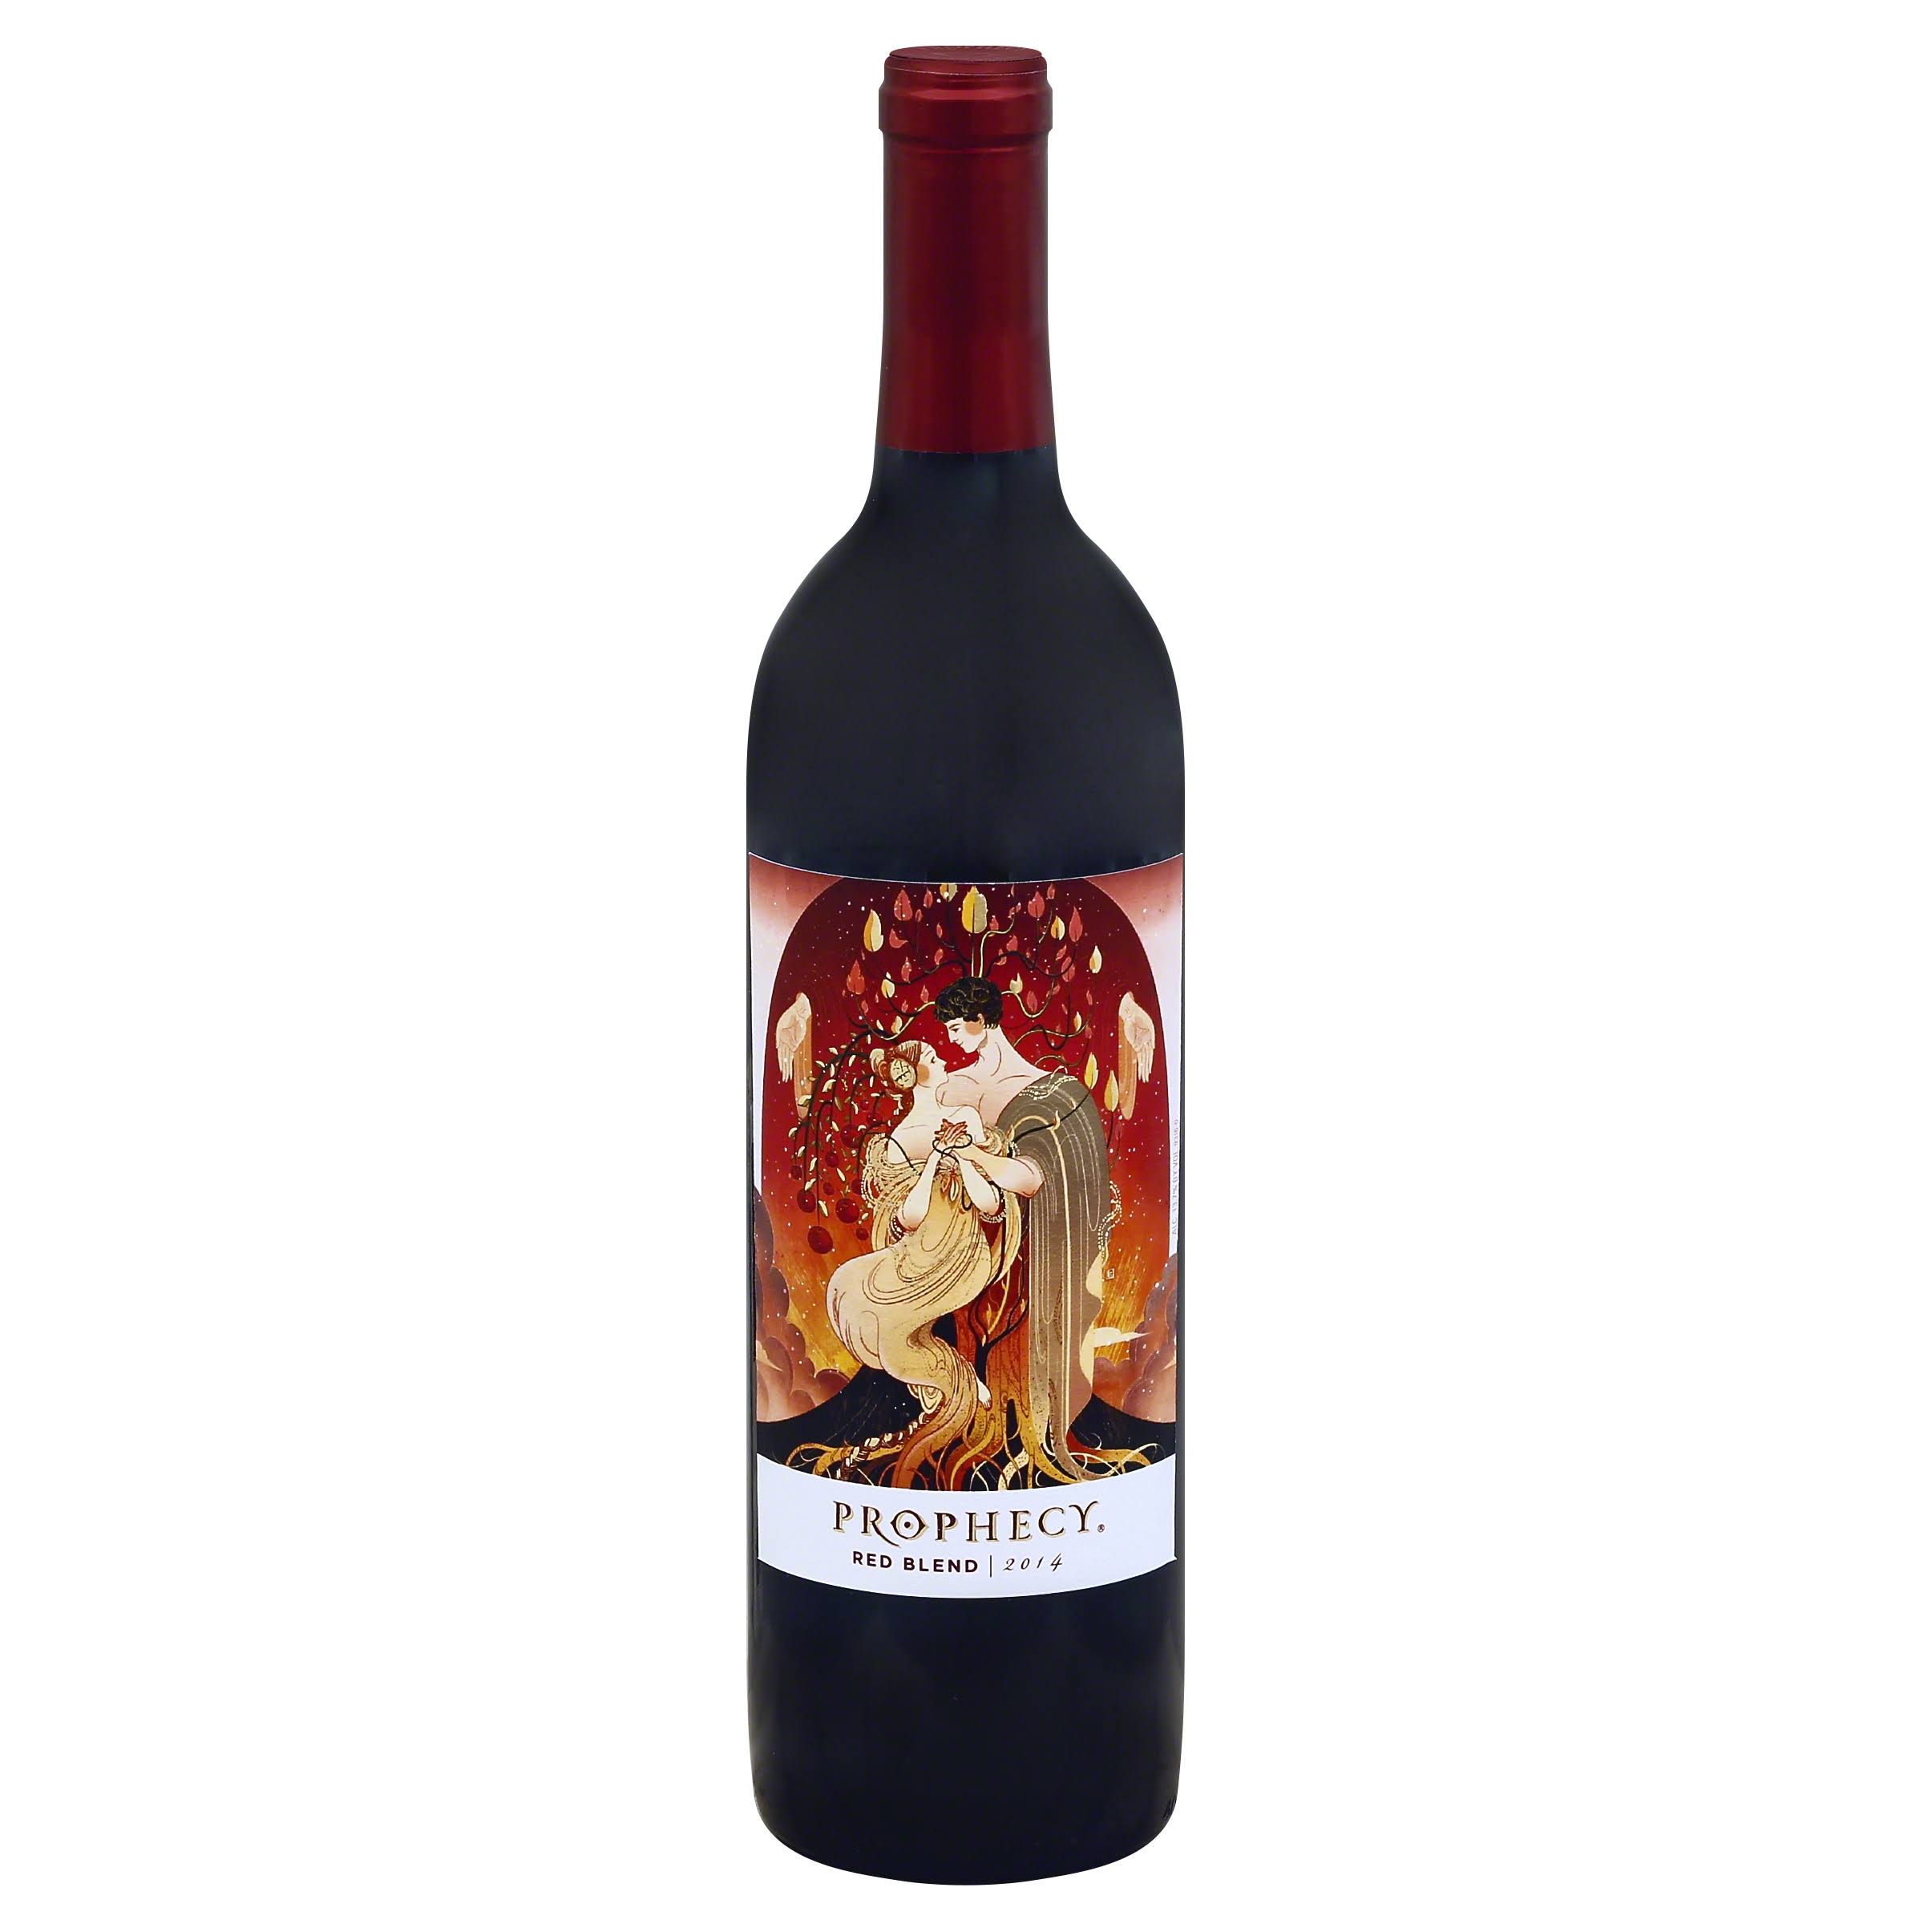 Prophecy Red Blend, The Lovers, 2014 - 750 ml